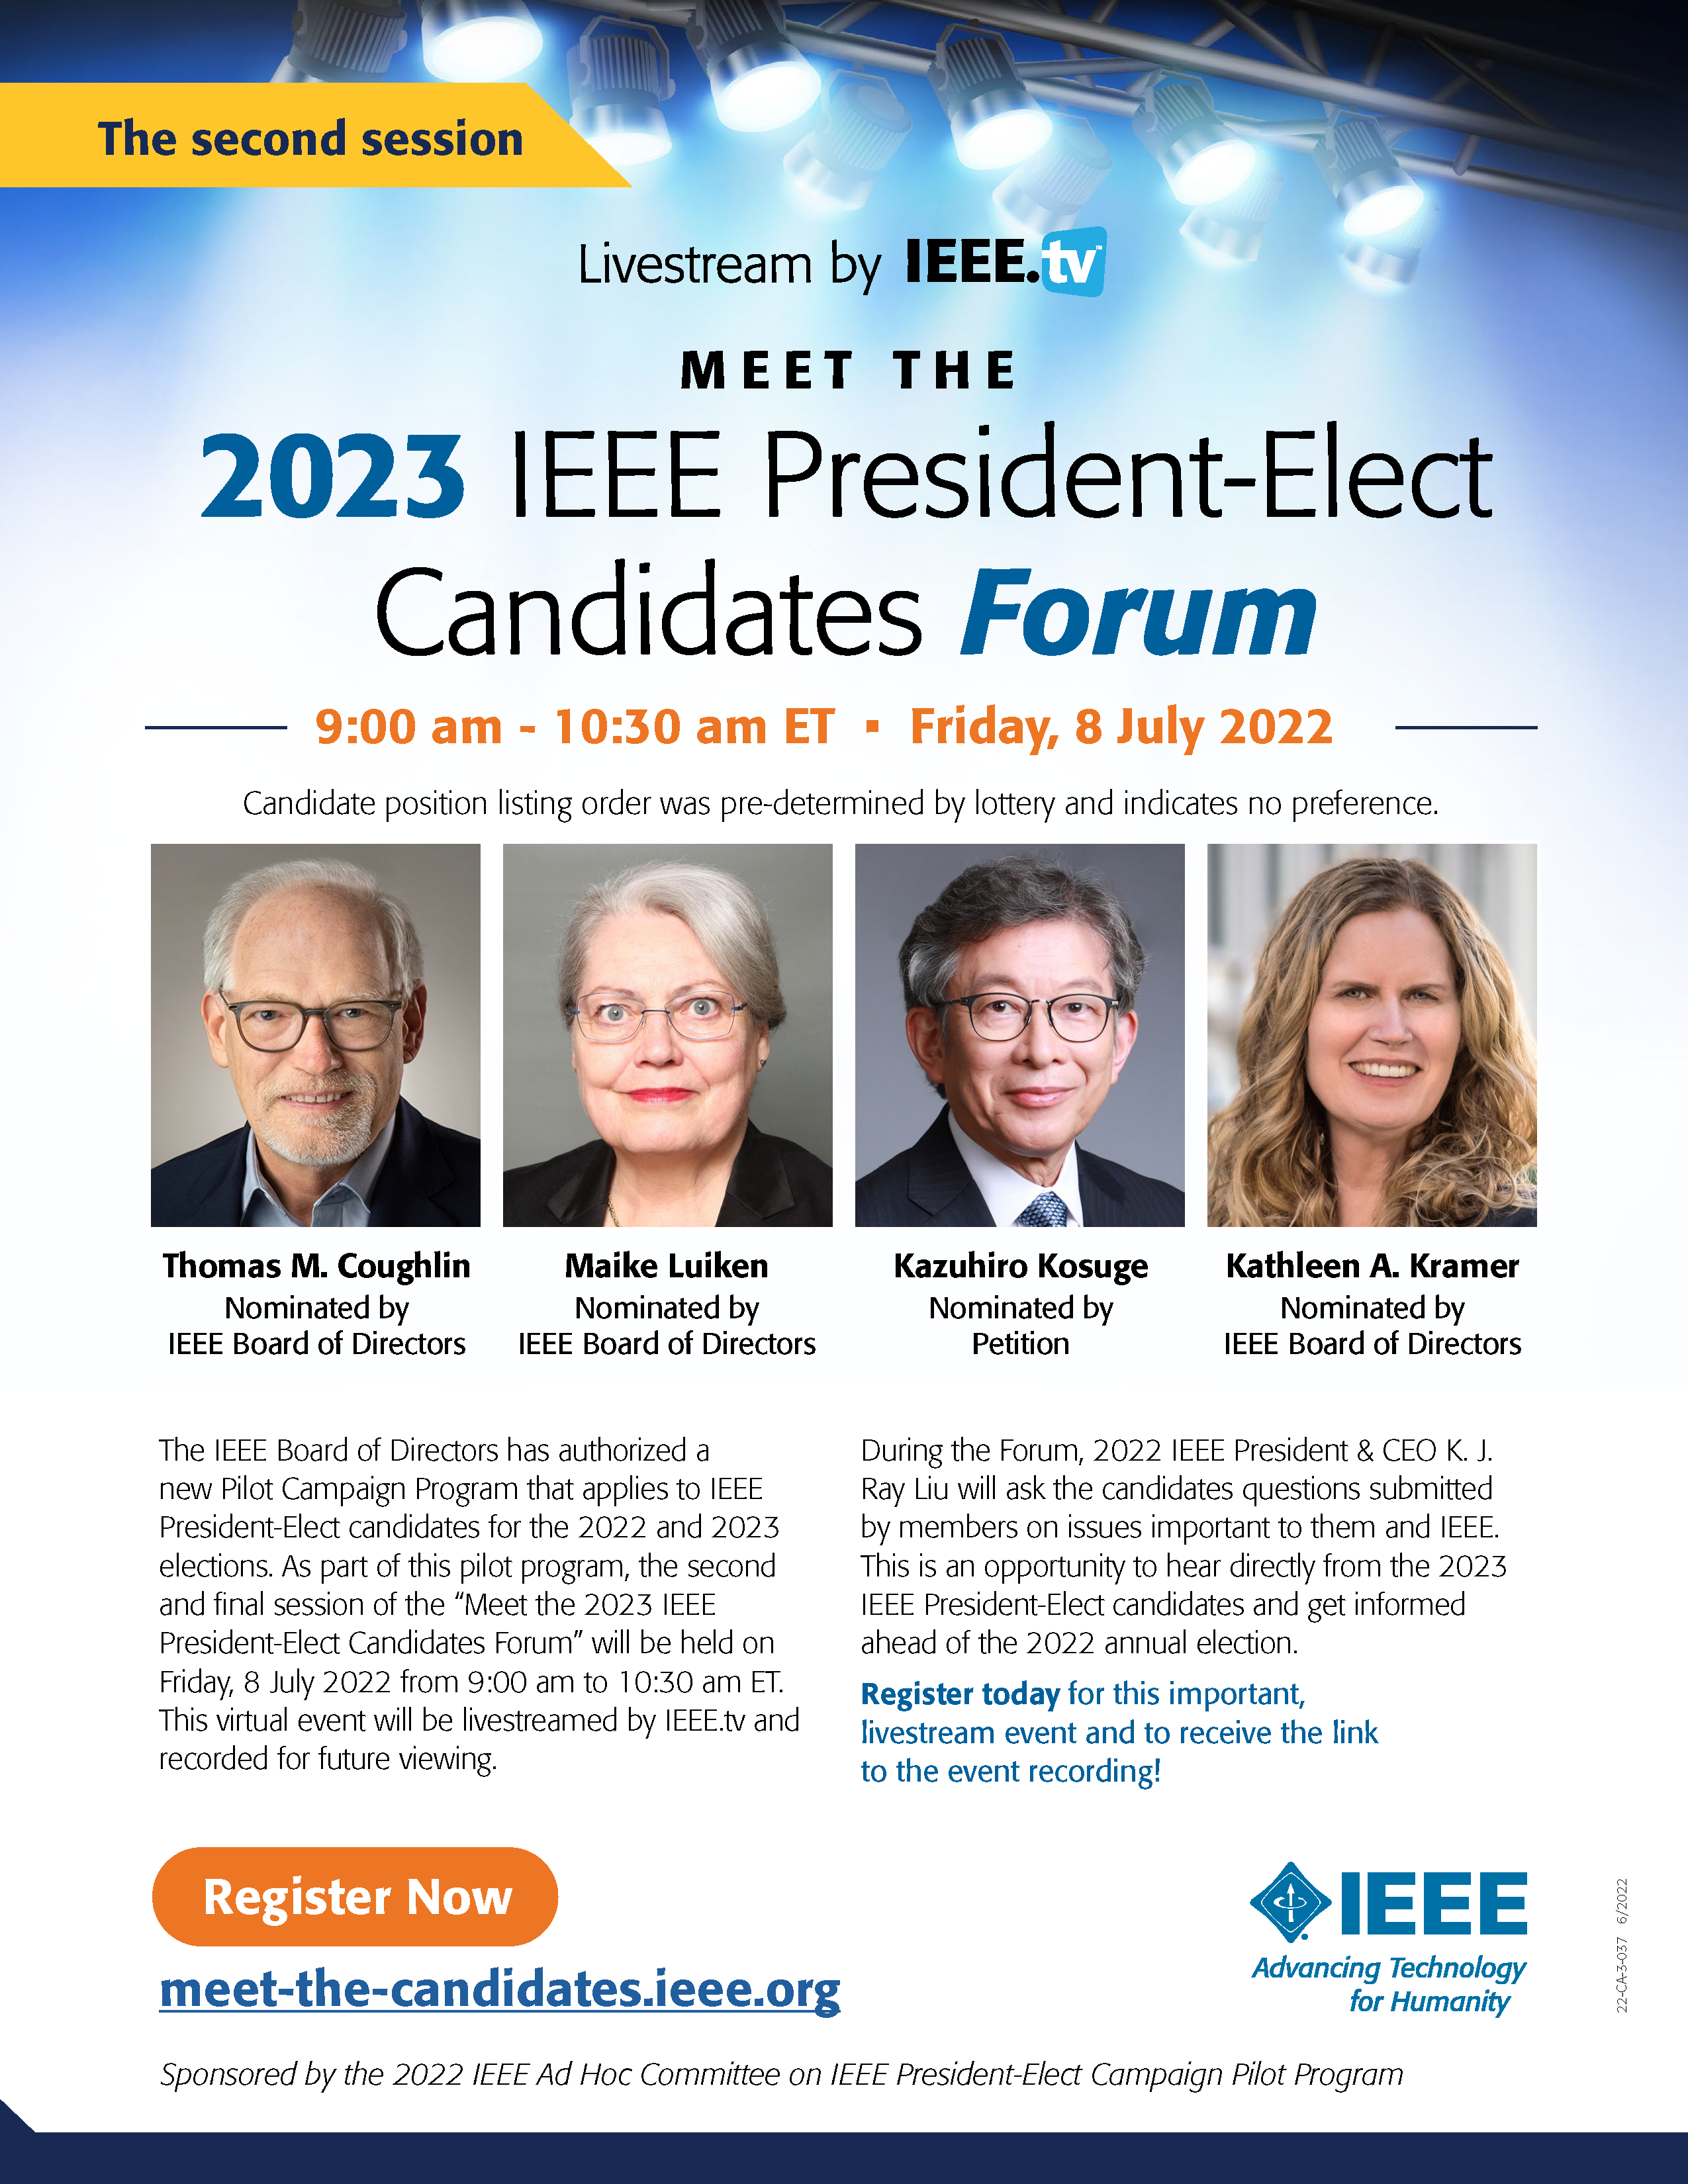 Flyer - Second session of the Meet the 2023 IEEE President-Elect Candidates Forum